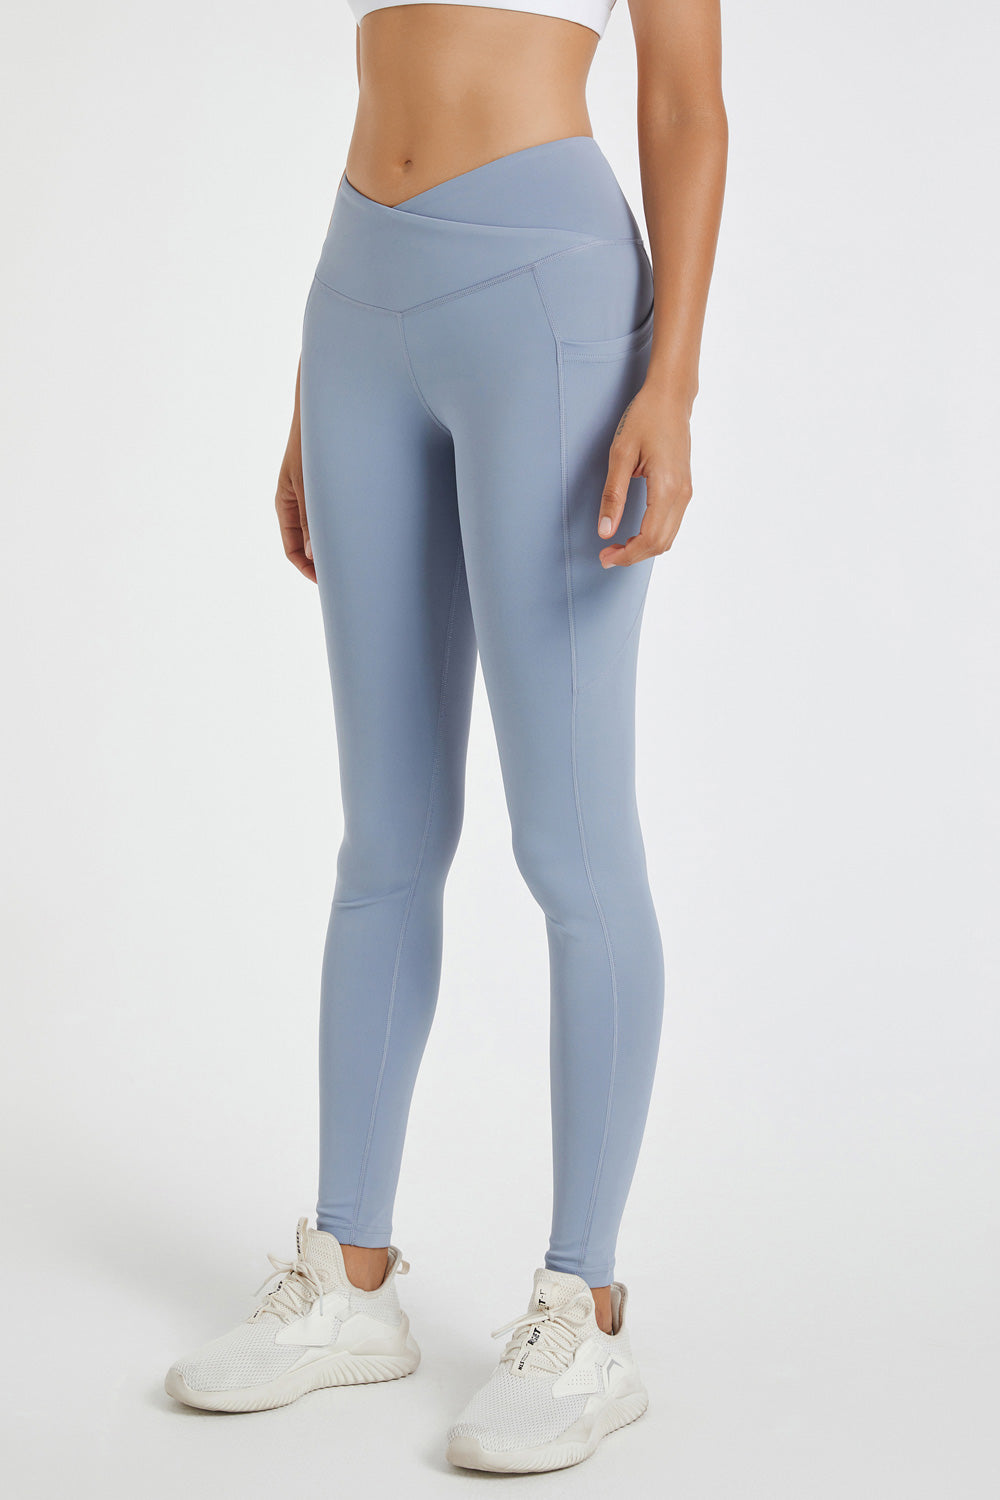 Loony Blue Crossover leggings with pockets